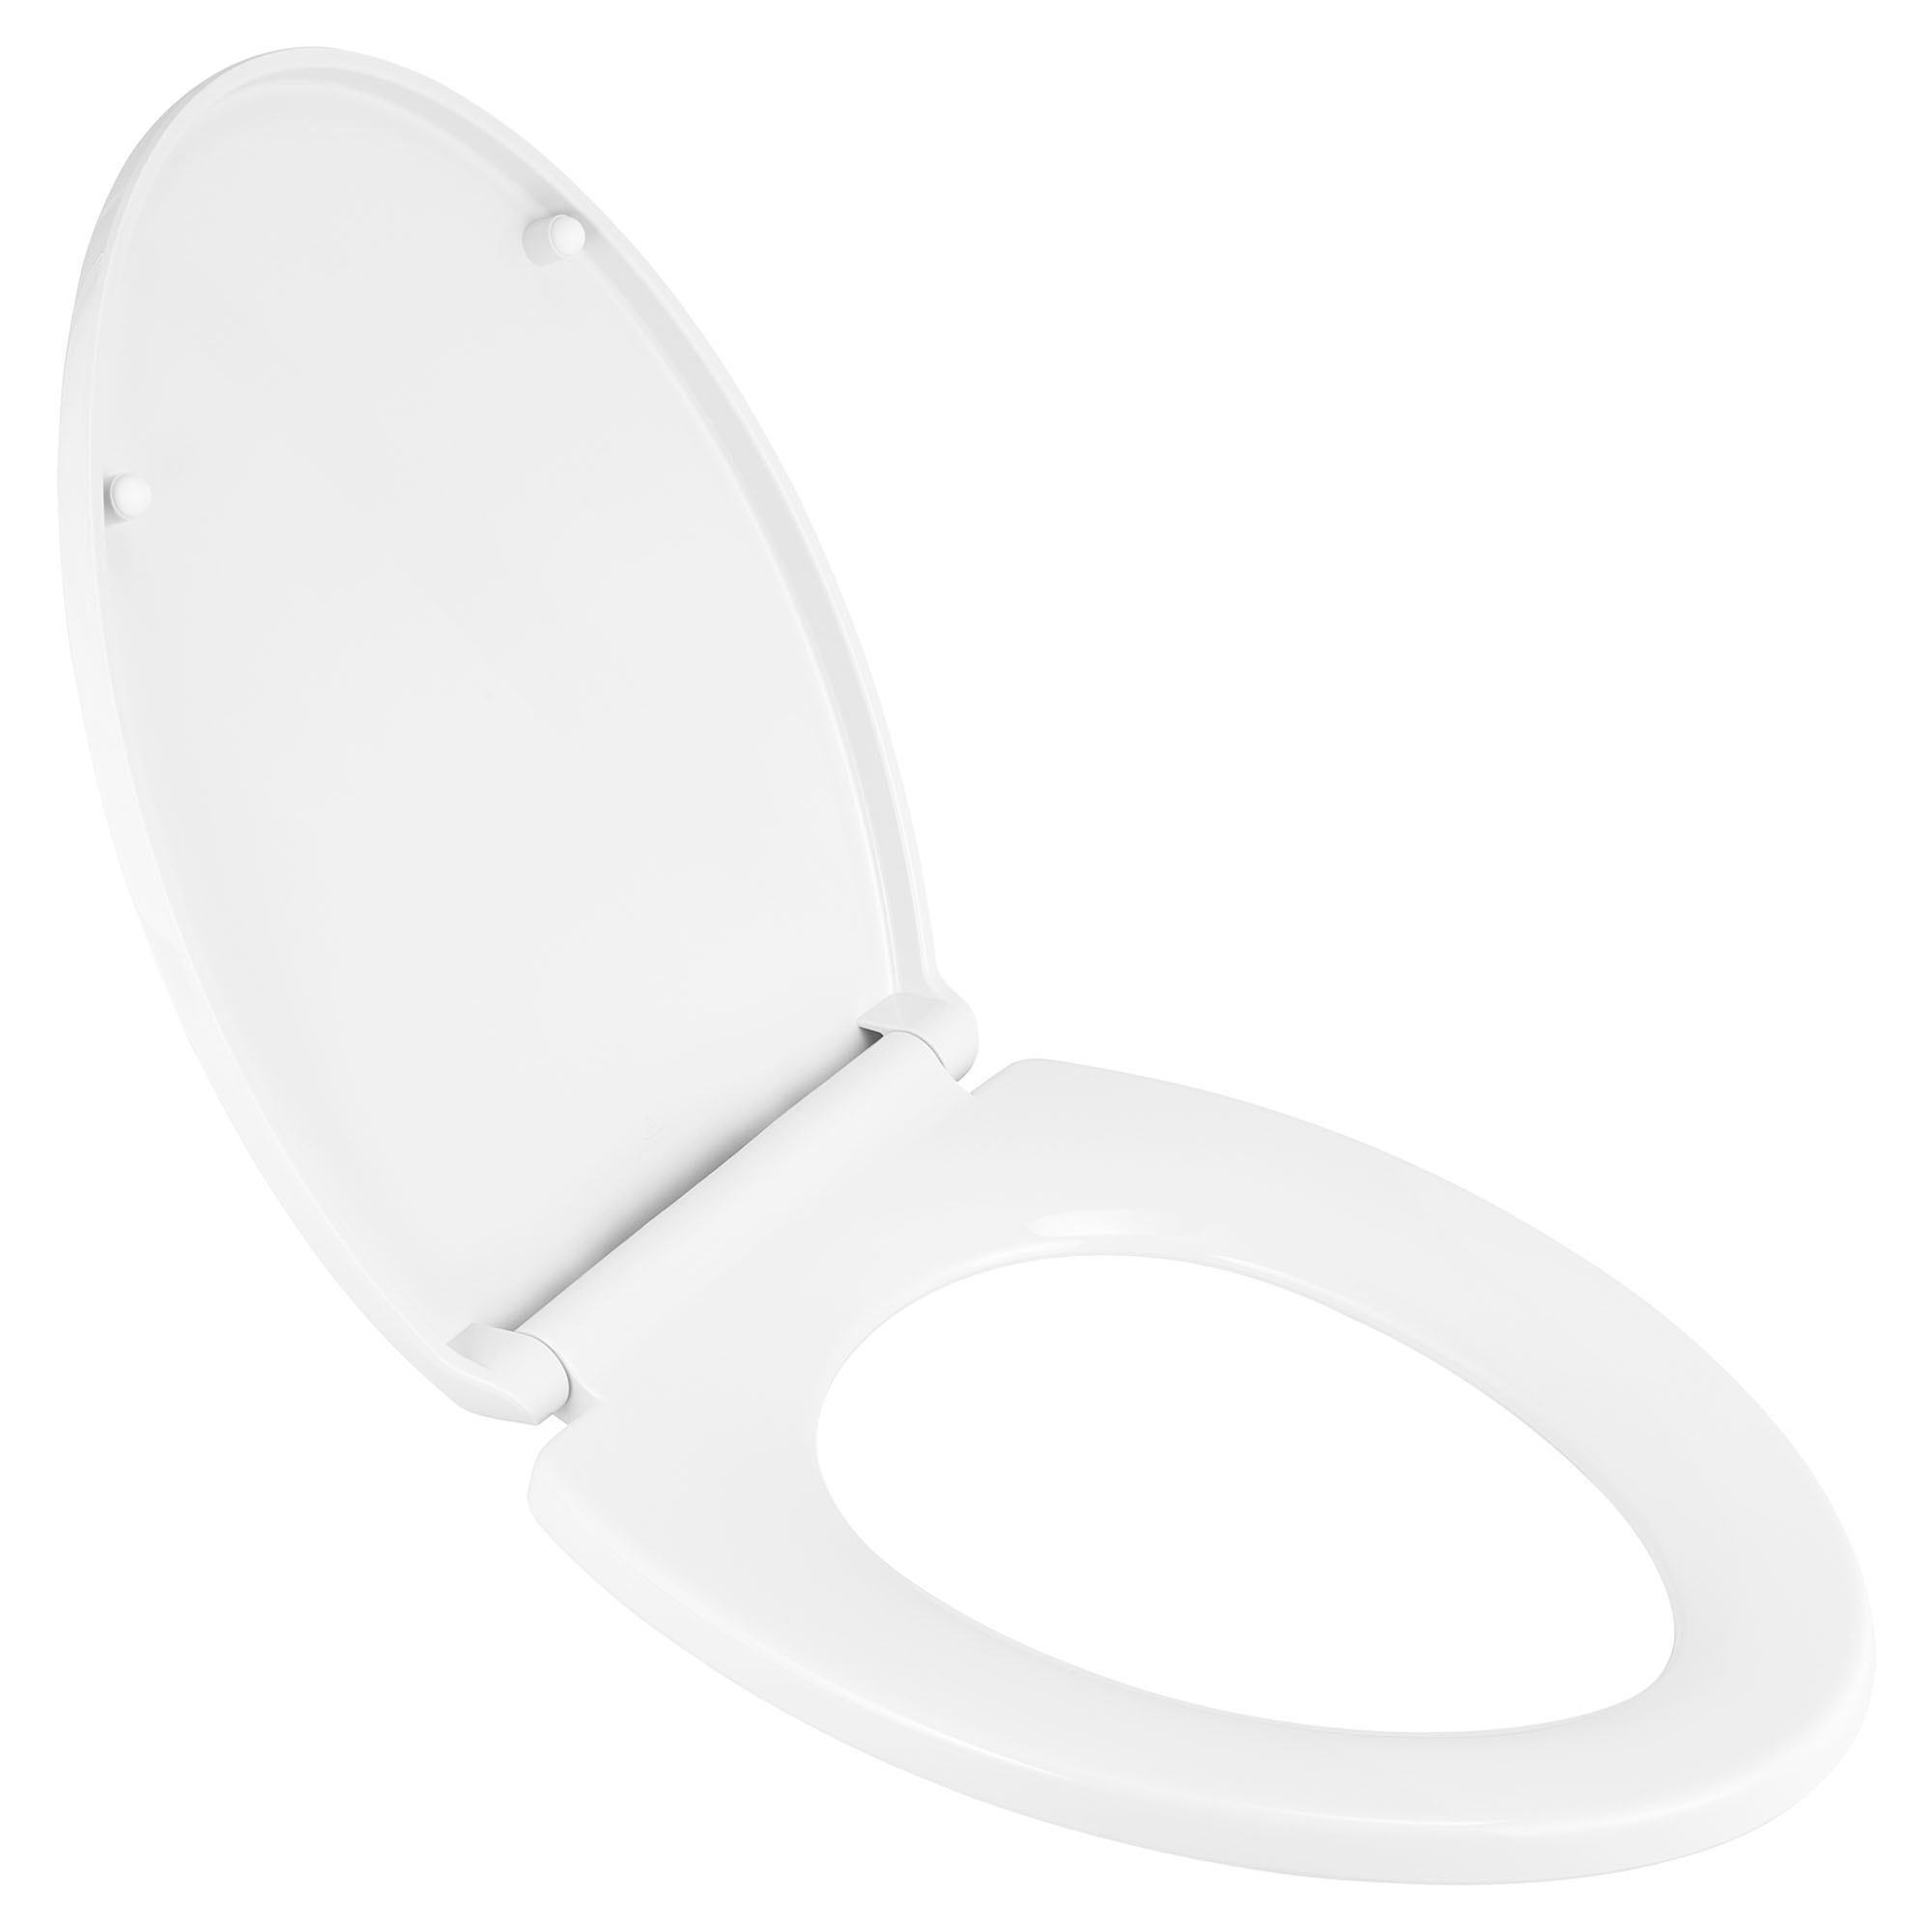 Transitional Elongated Closed Front Toilet Seat